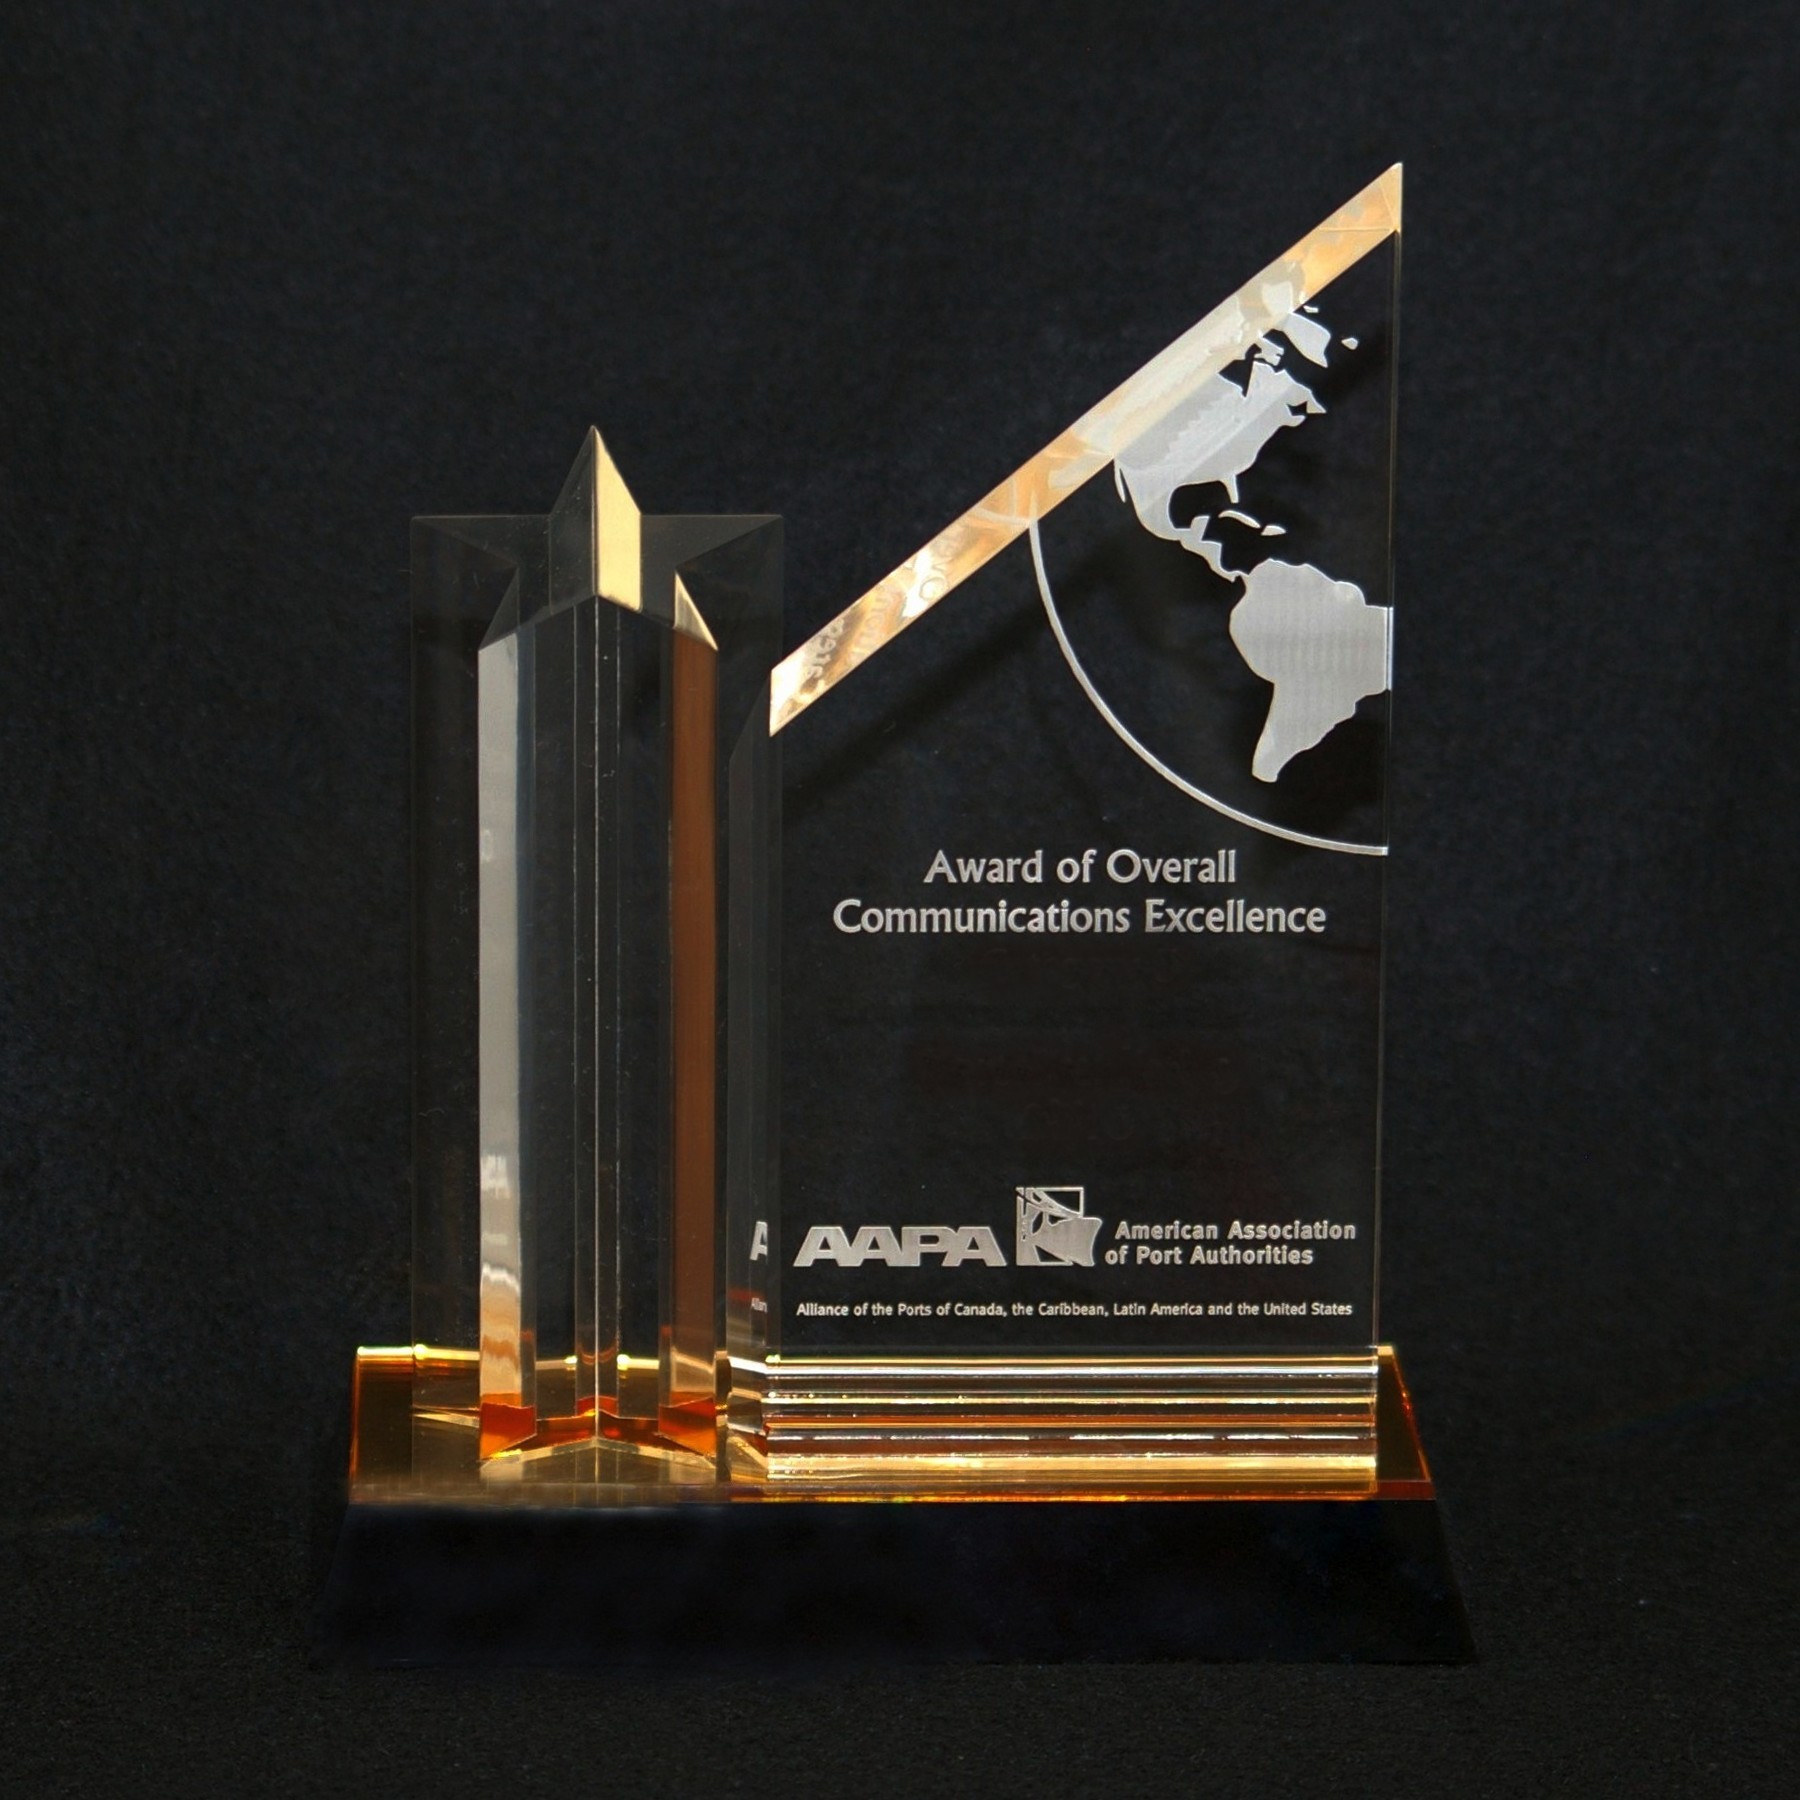 23 Ports Earn Awards In AAPA’s 2020 Communications Competition